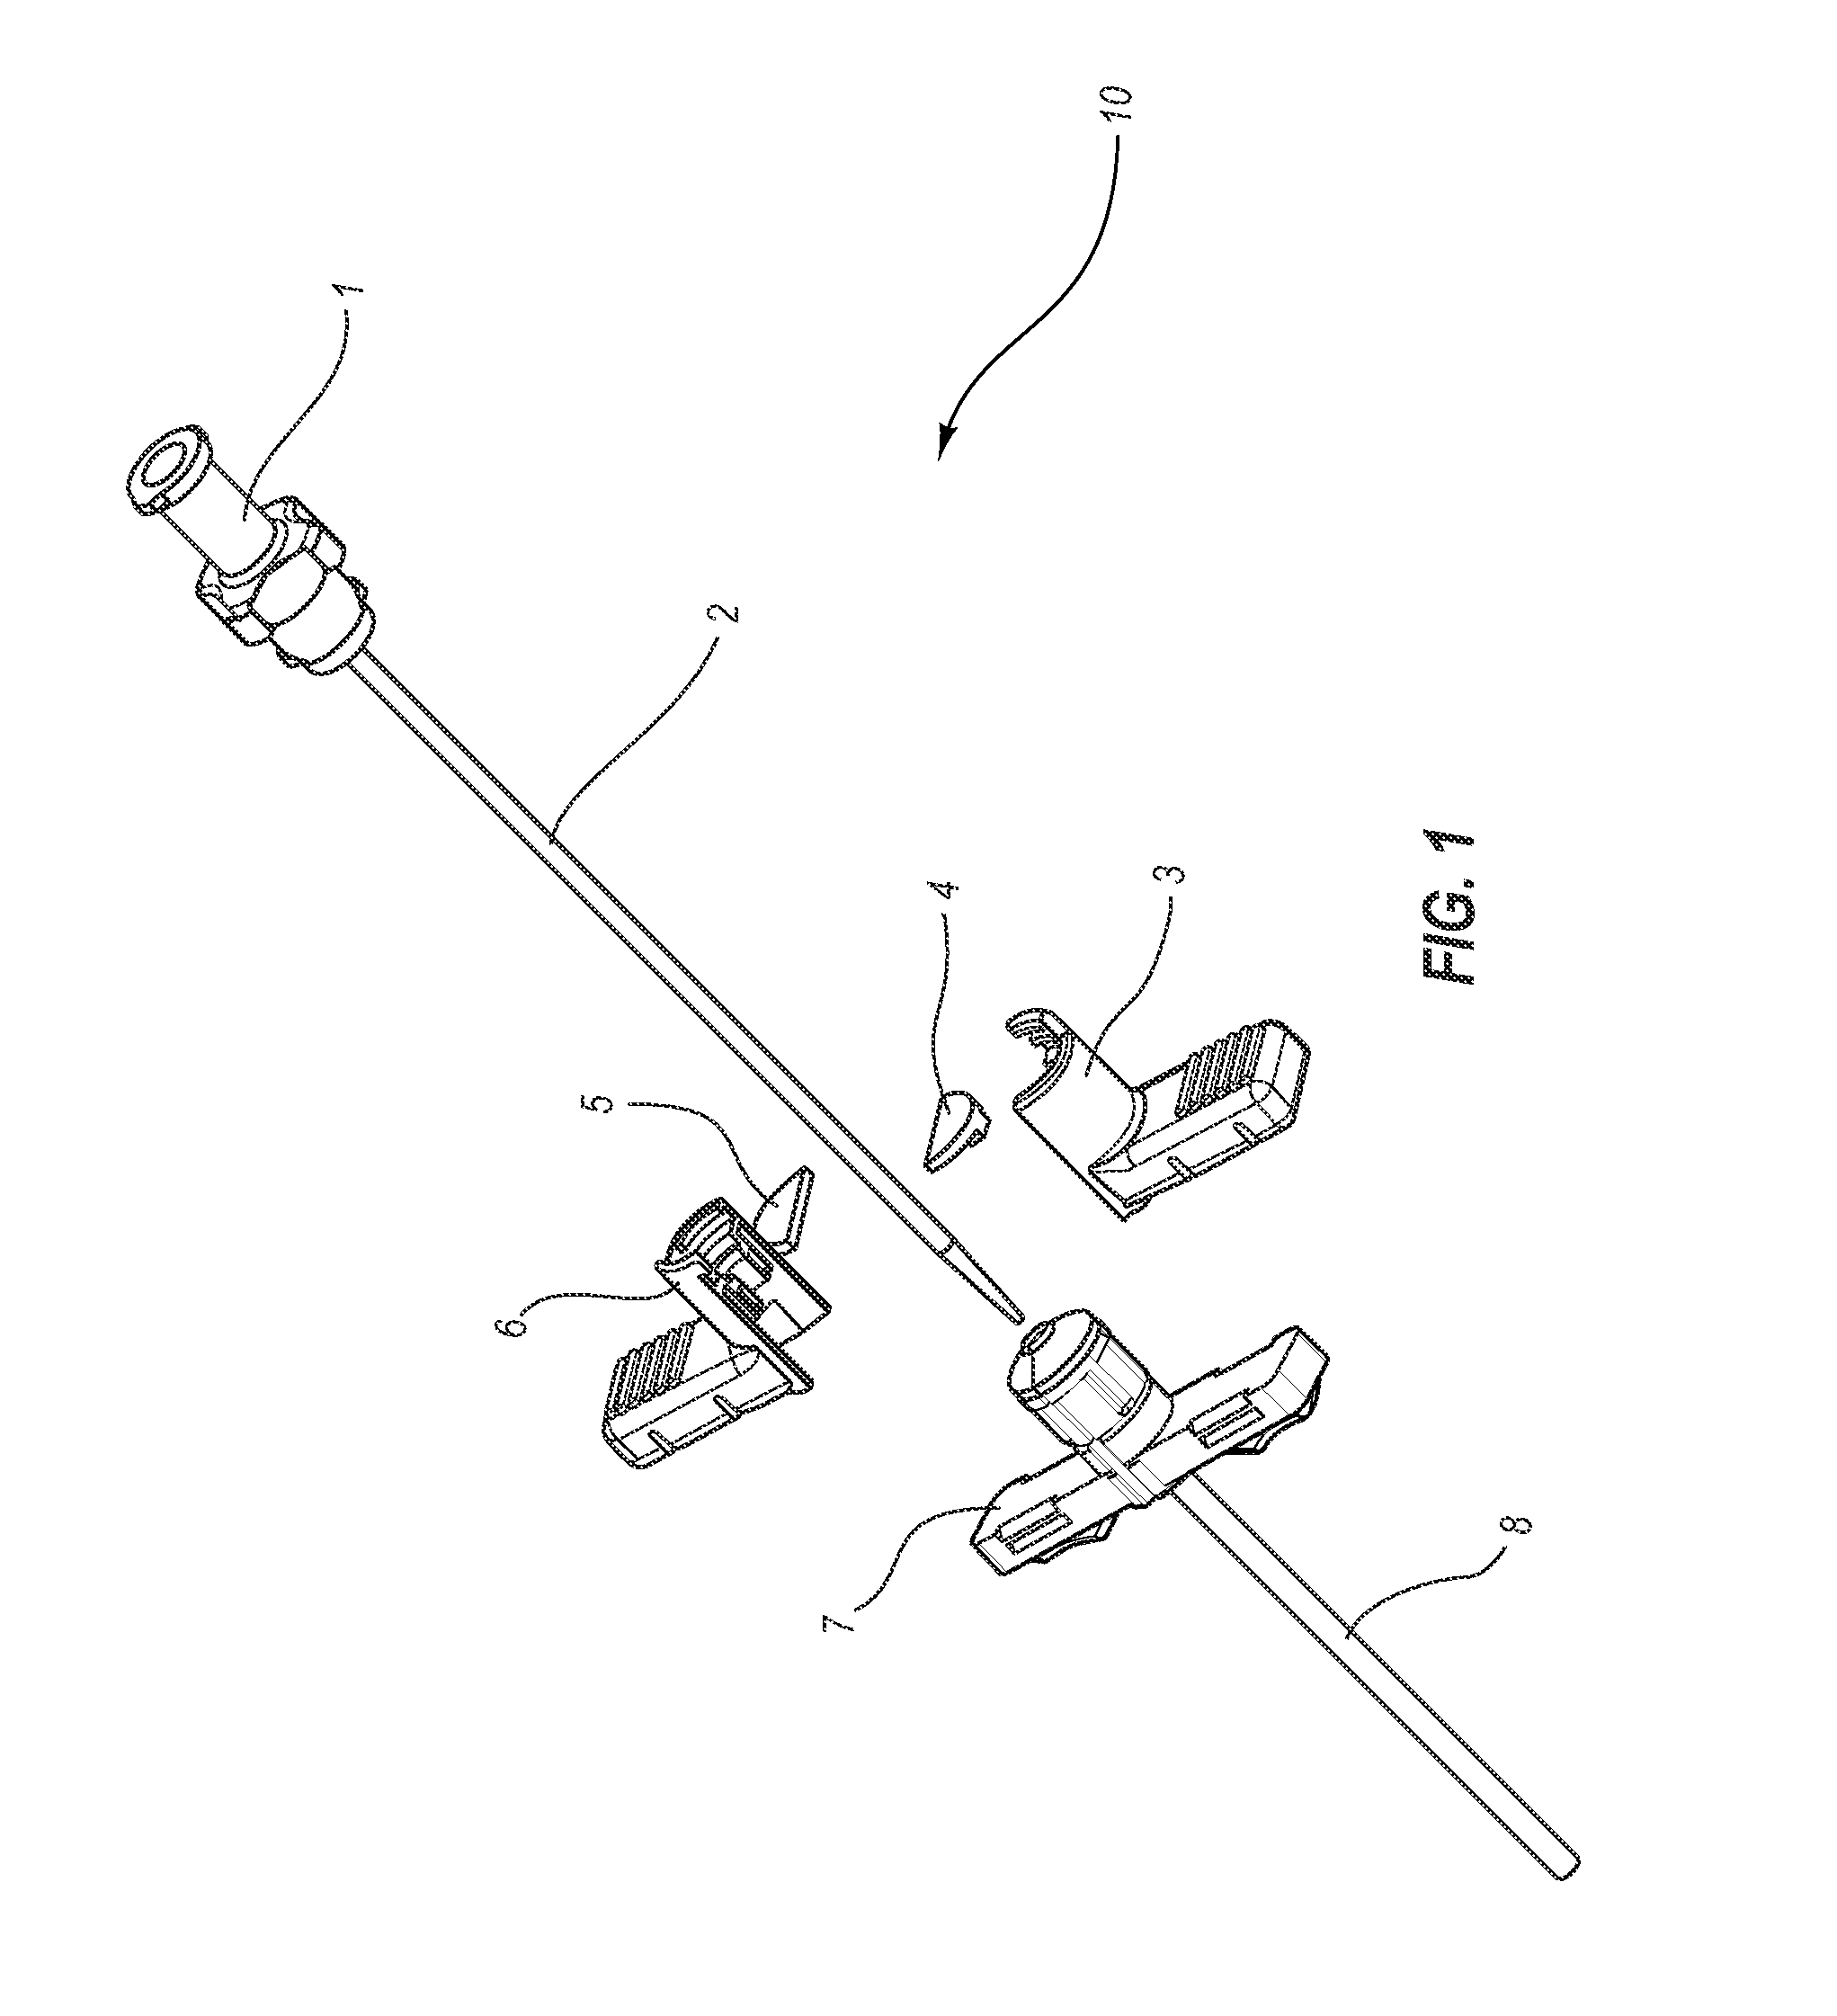 Catheter Introducer Including a Valve and Valve Actuator